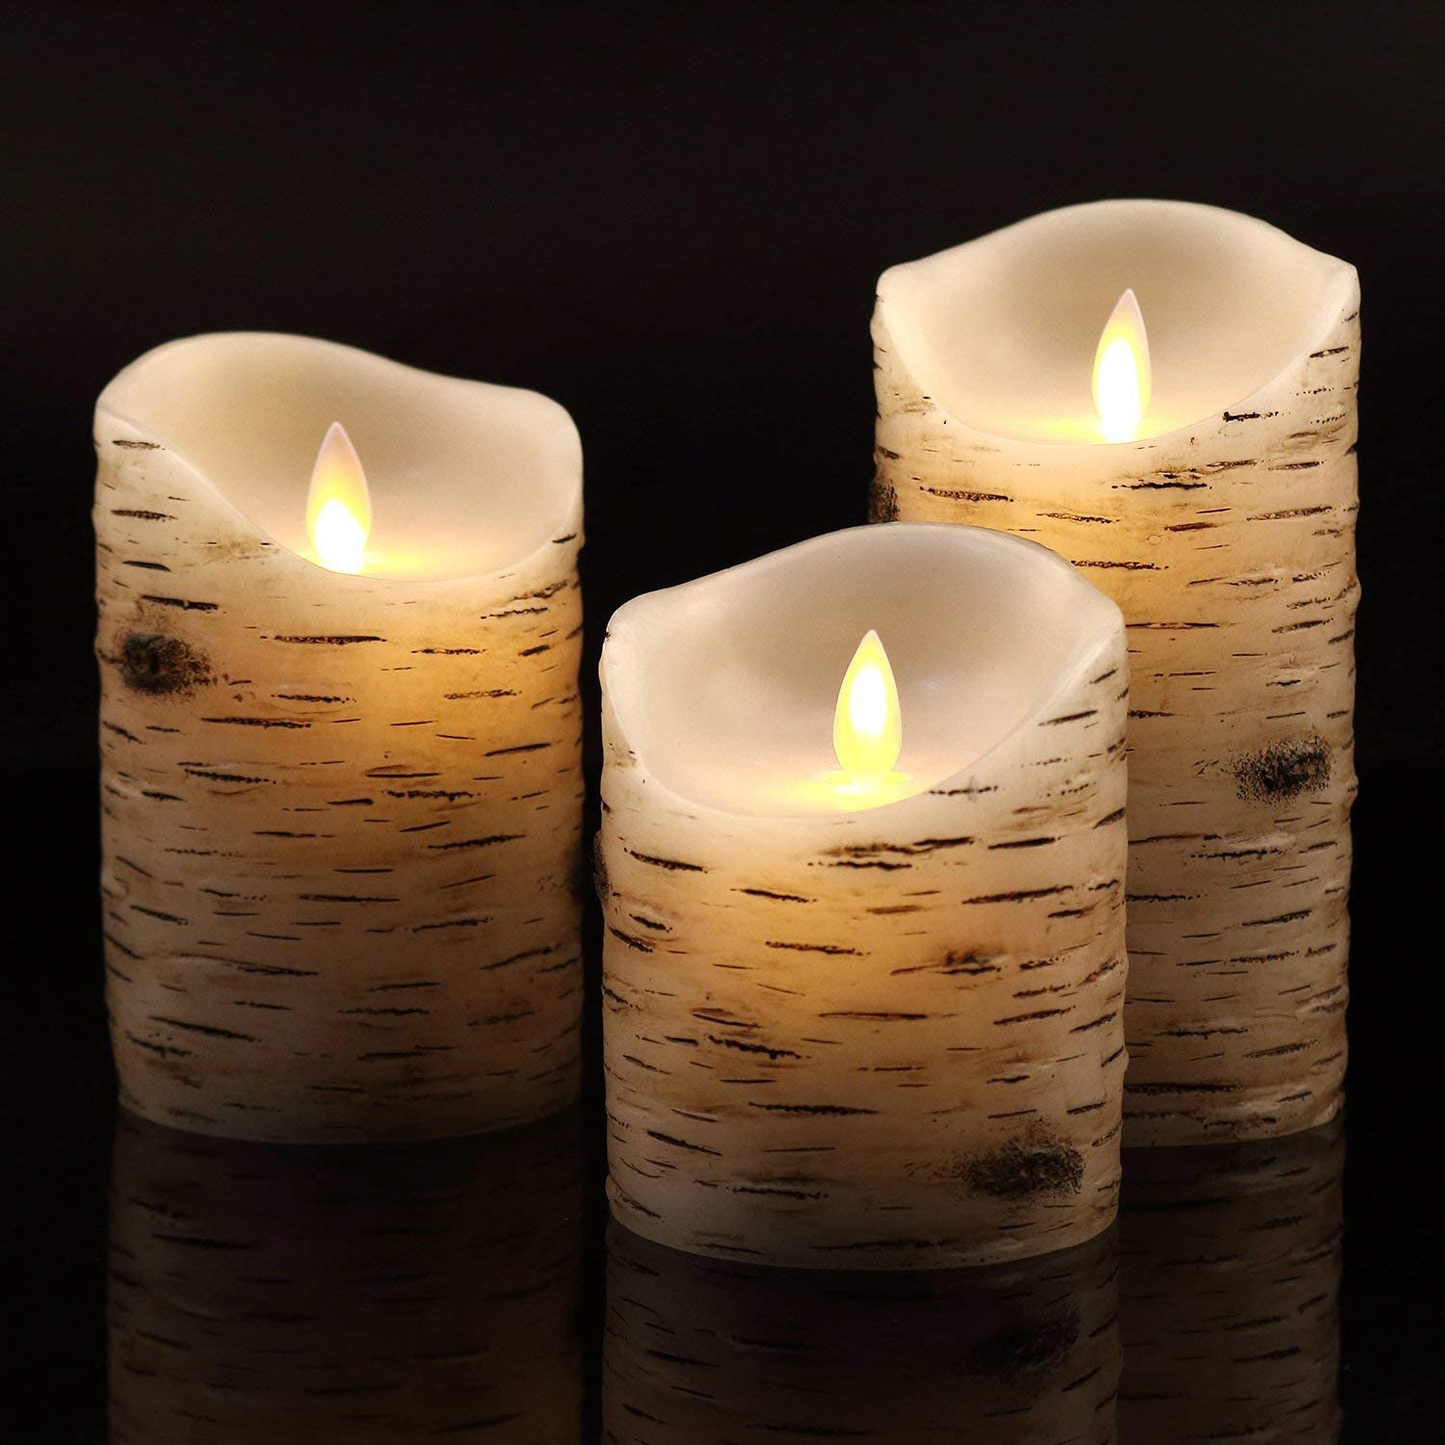 Antizer Flameless Candles Led Candles Pack of 9 (H 4" 5" 6" 7" 8" 9" X D 2.2") Ivory Real Wax Battery Candles with Remote Timer